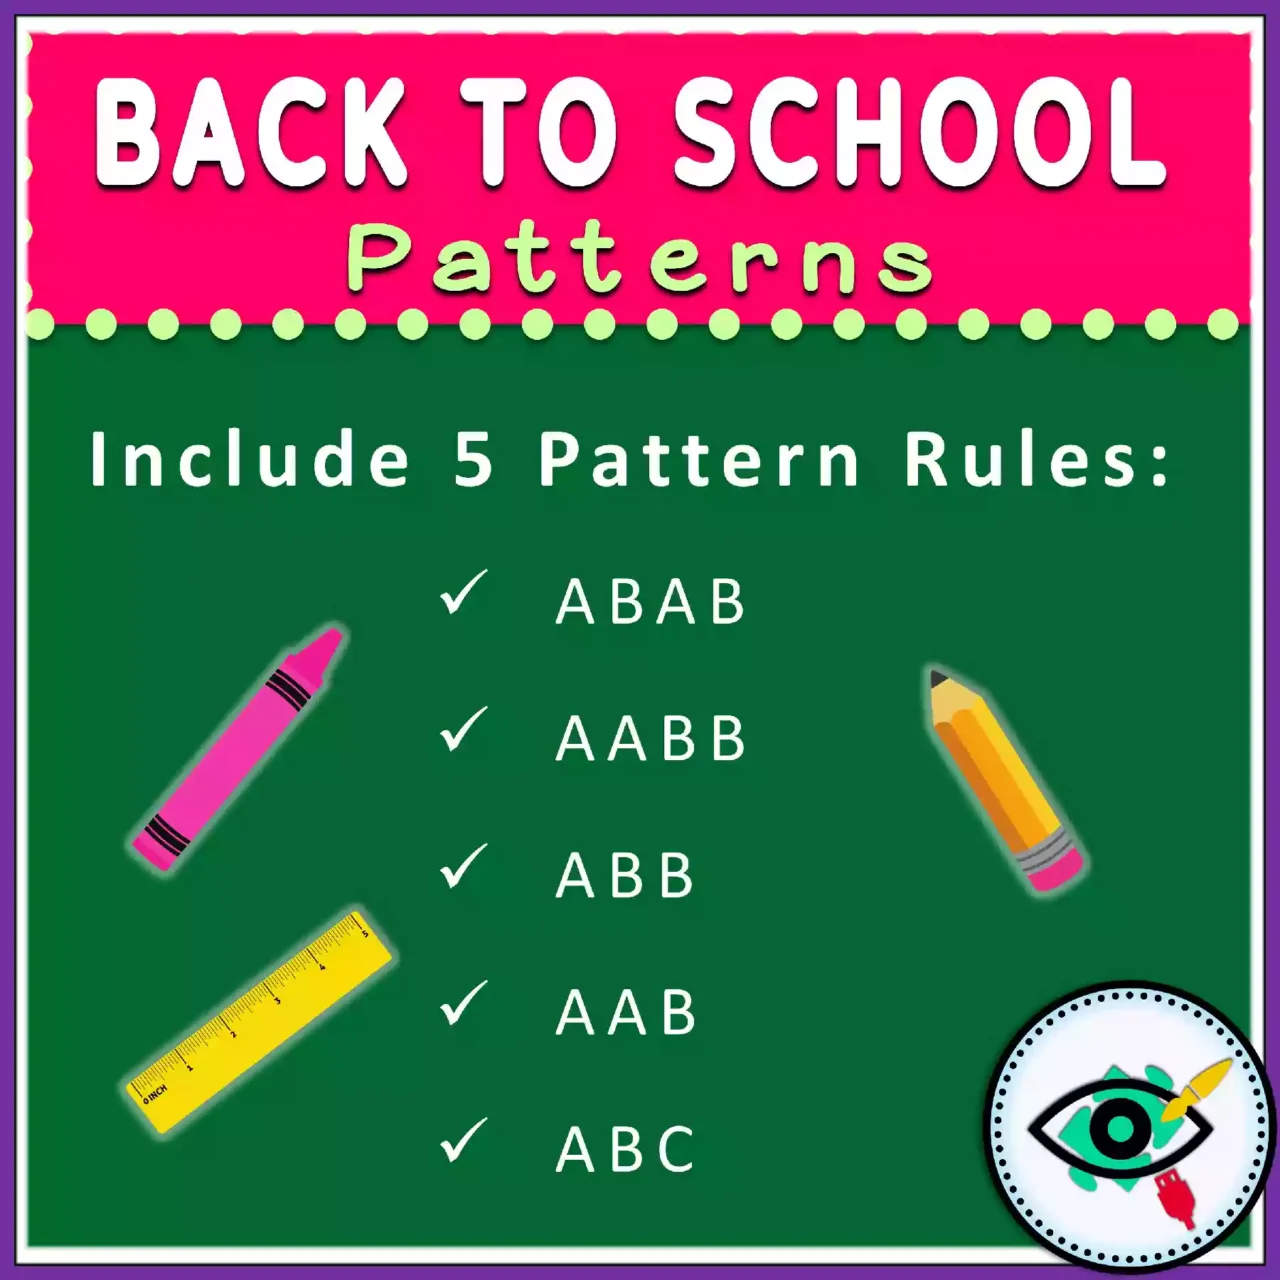 Back to School Patterns - Featured 1